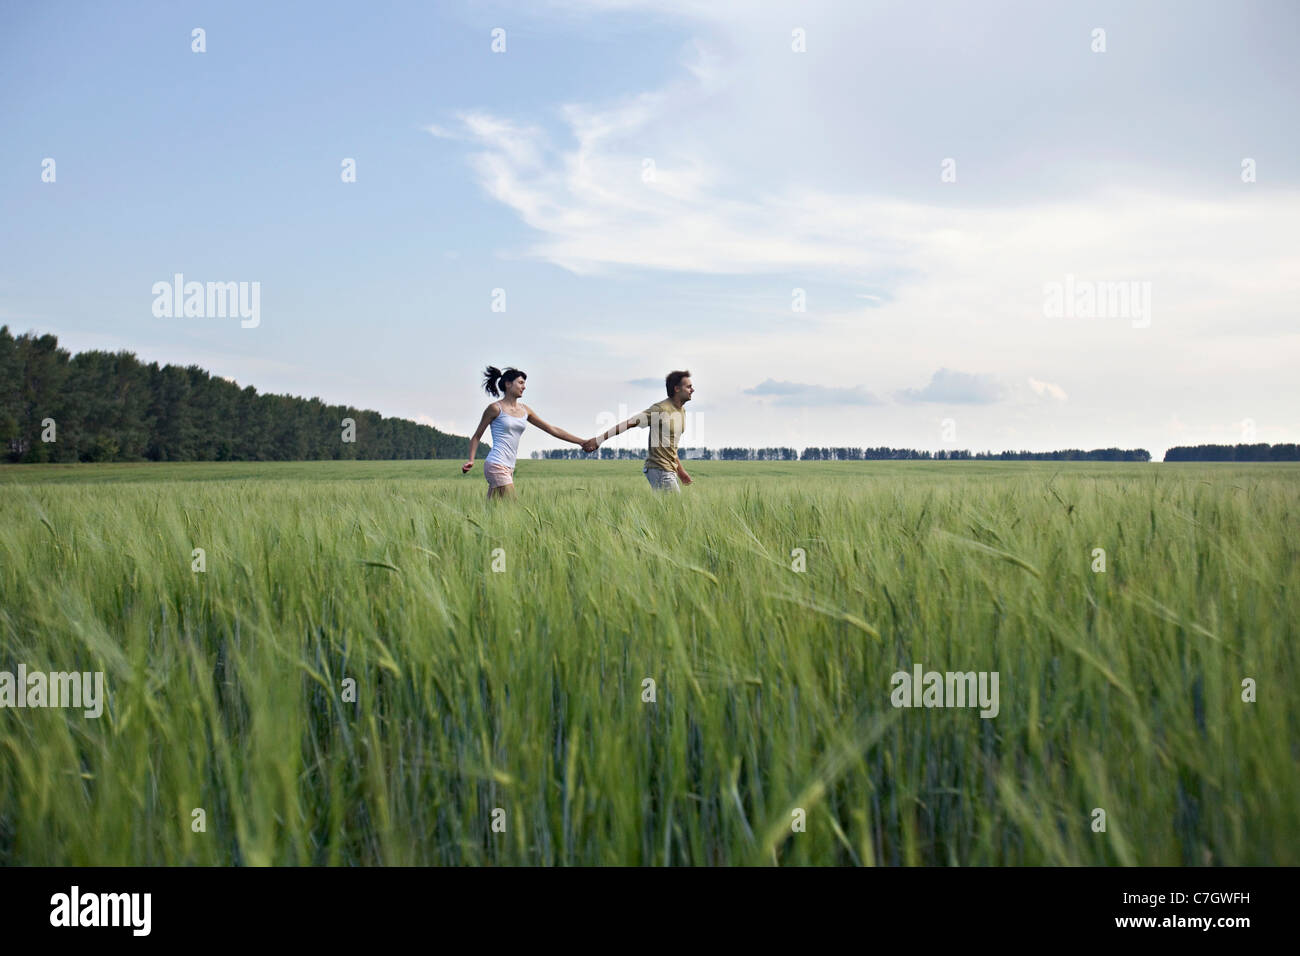 A man and woman holding hands and running through a wheat field Stock Photo